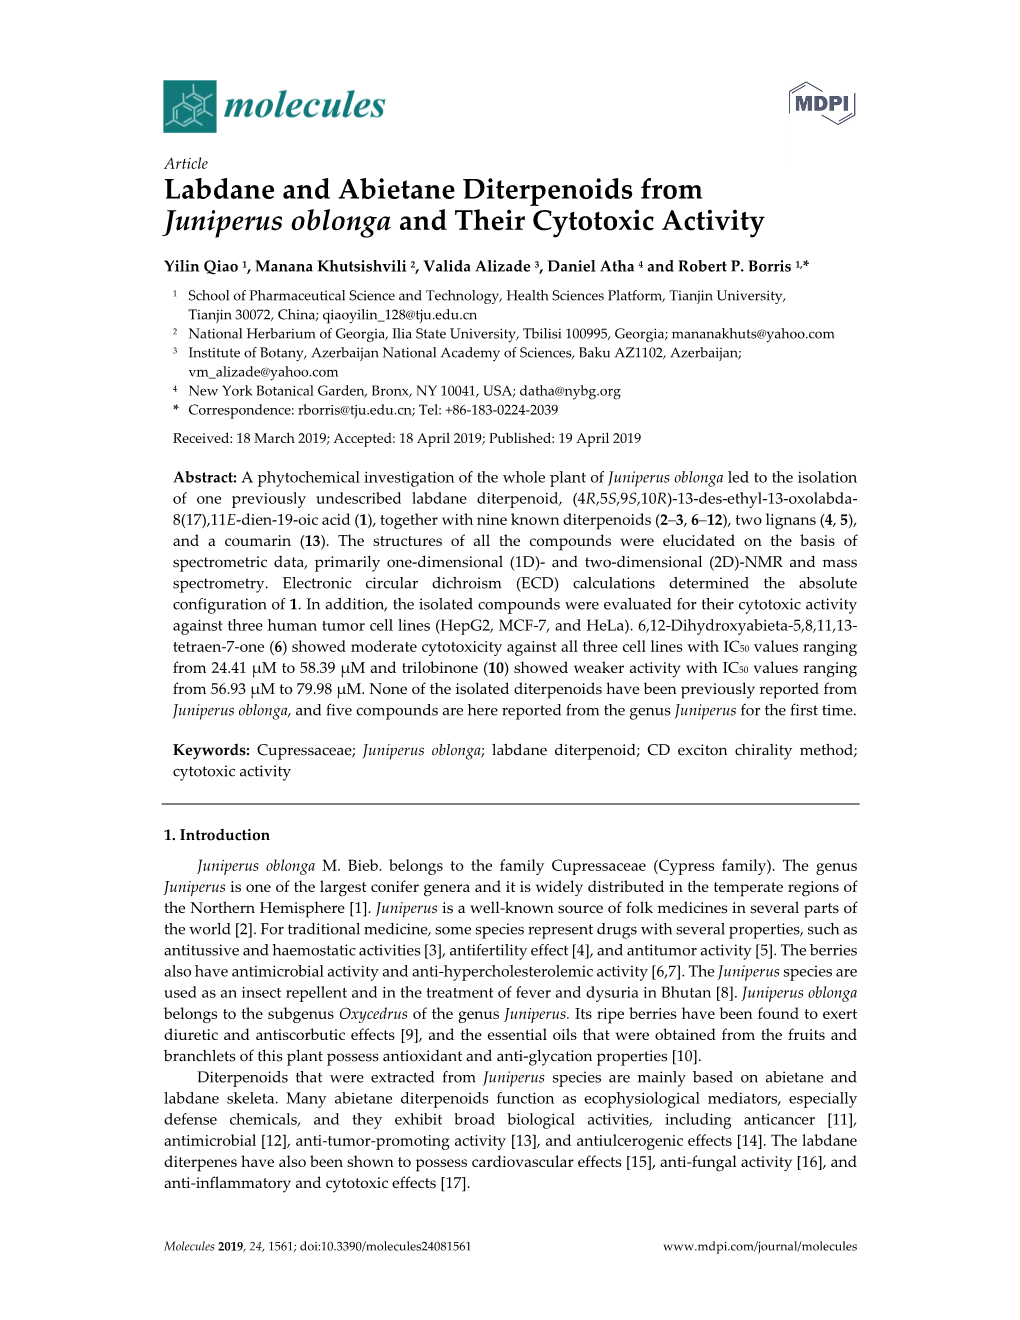 Labdane and Abietane Diterpenoids from Juniperus Oblonga and Their Cytotoxic Activity